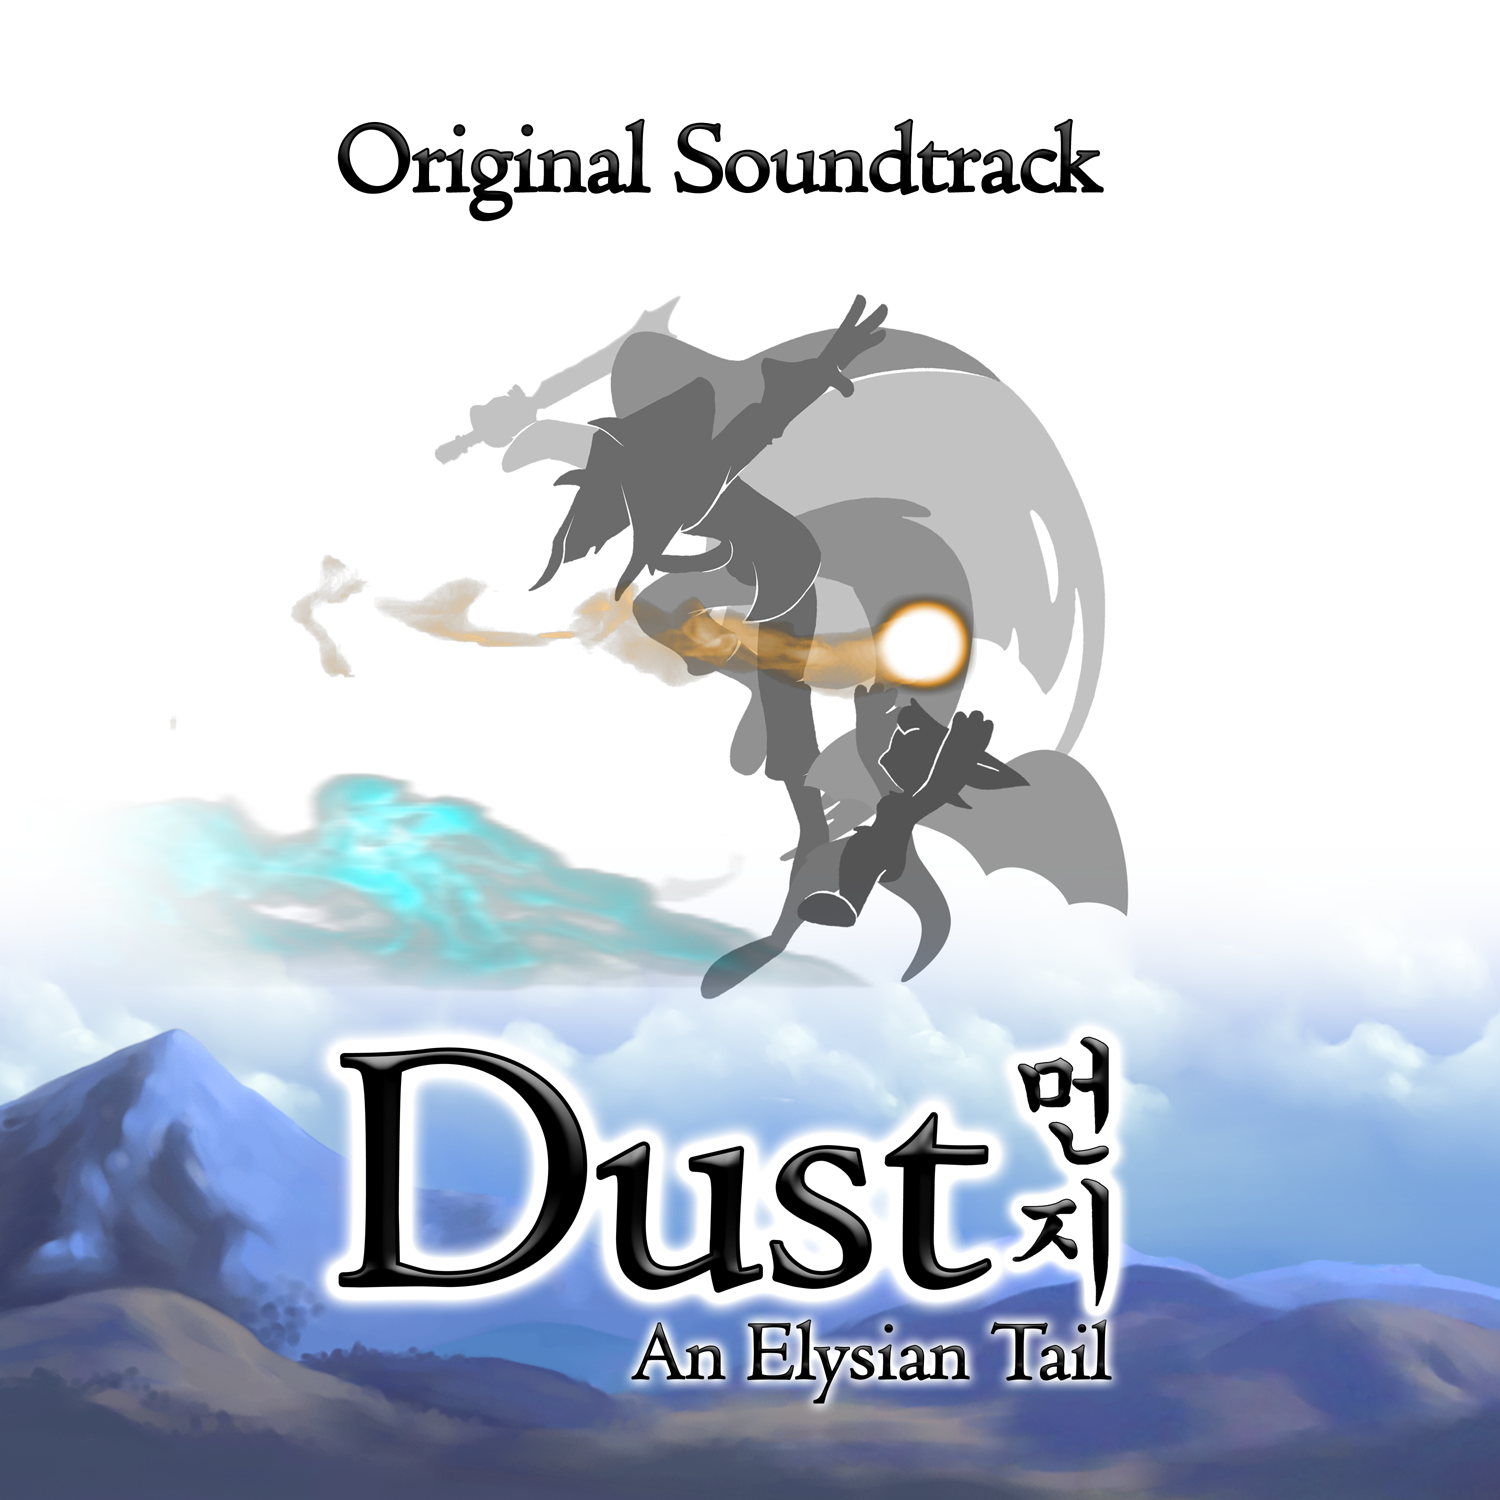 Dust: An Elysian Tail Soundtrack now available!